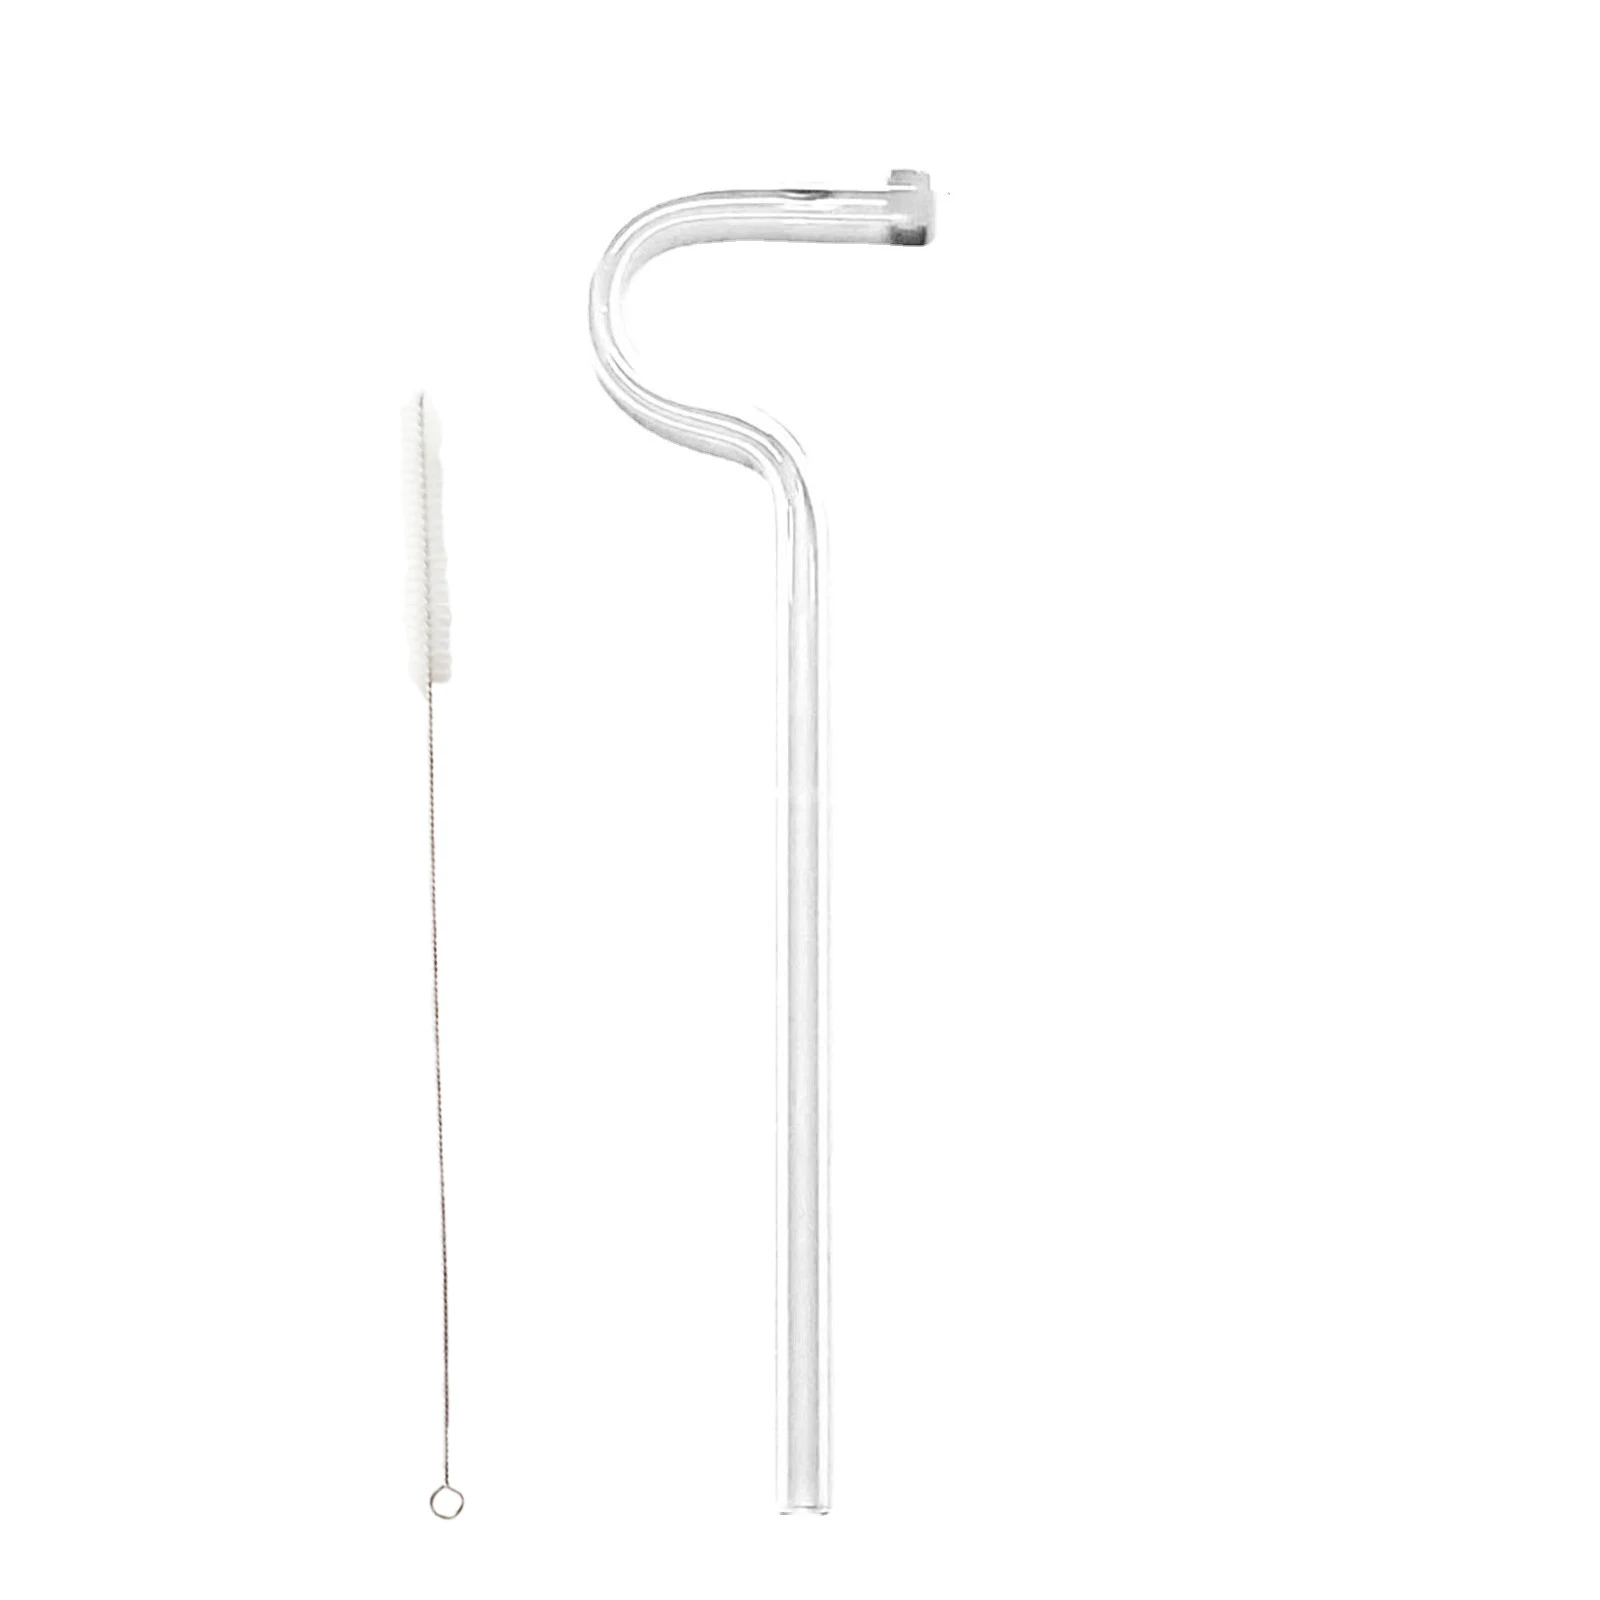 Wholesale DD1237 Set Of 3 Reusable Bent Anti Wrinkle Straws Flute Style  Design Glass Drinking Straw For Engaging Lips Horizontally From  m.